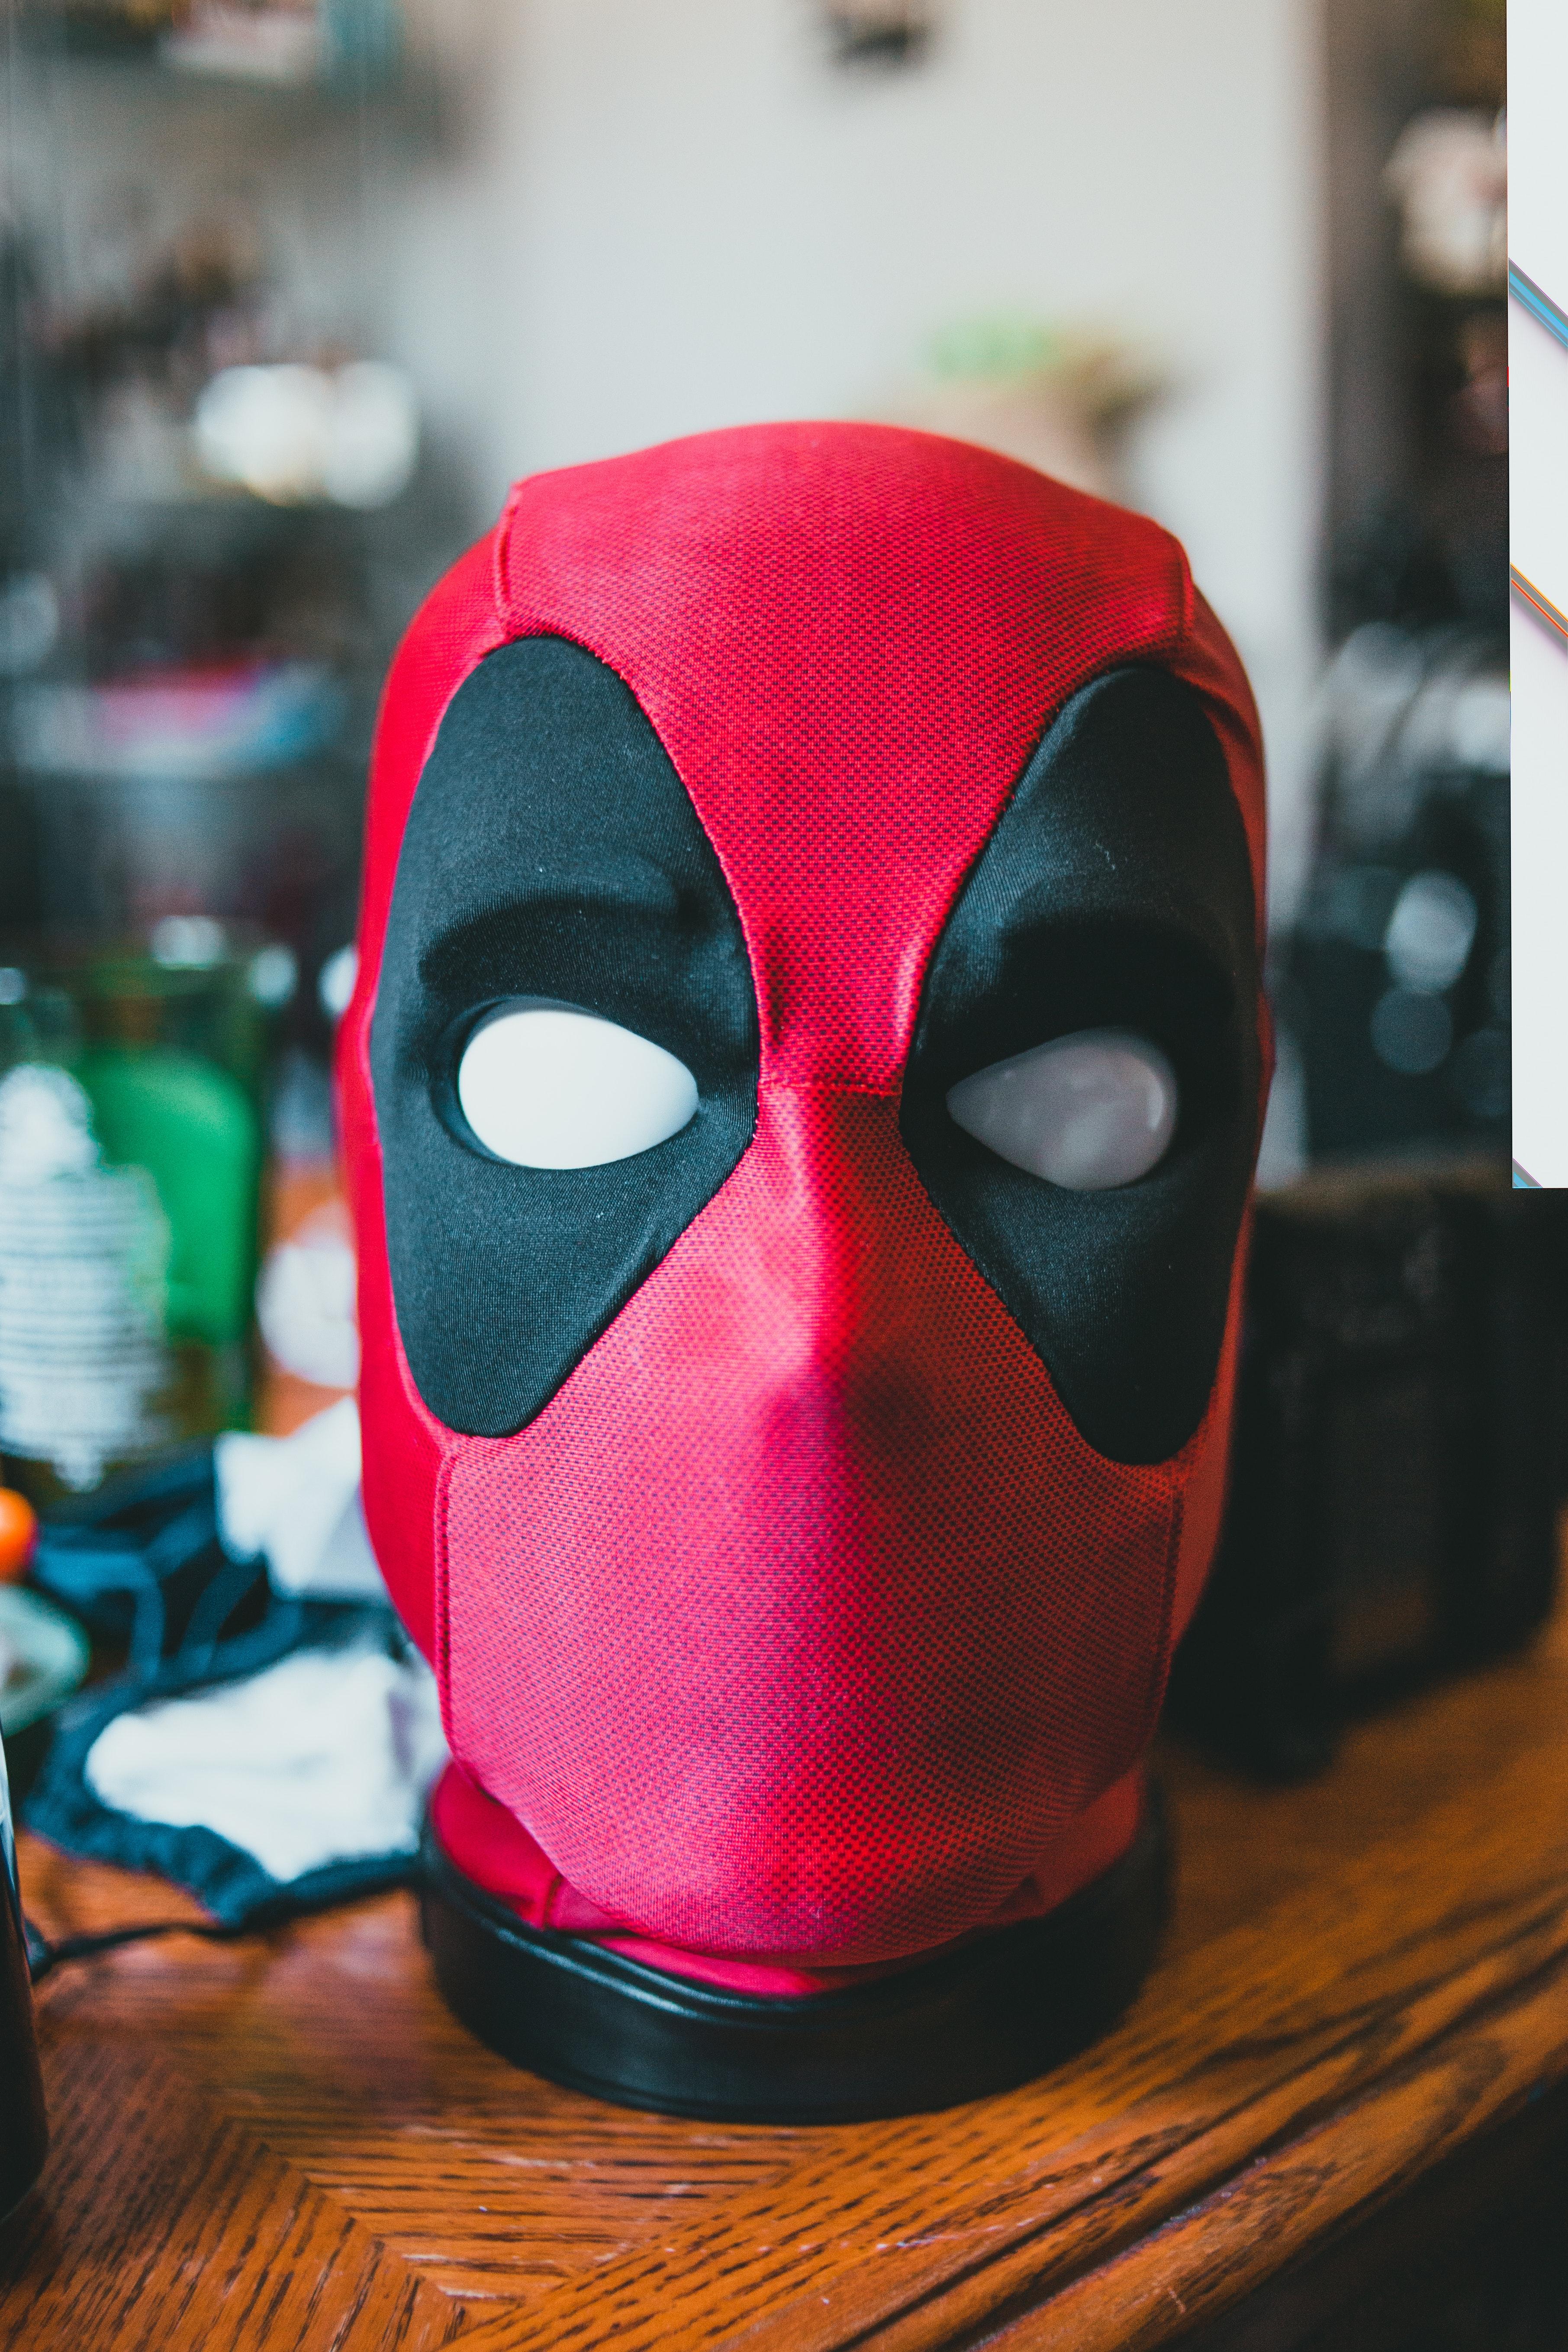 Why Does Deadpool Wear A Mask 